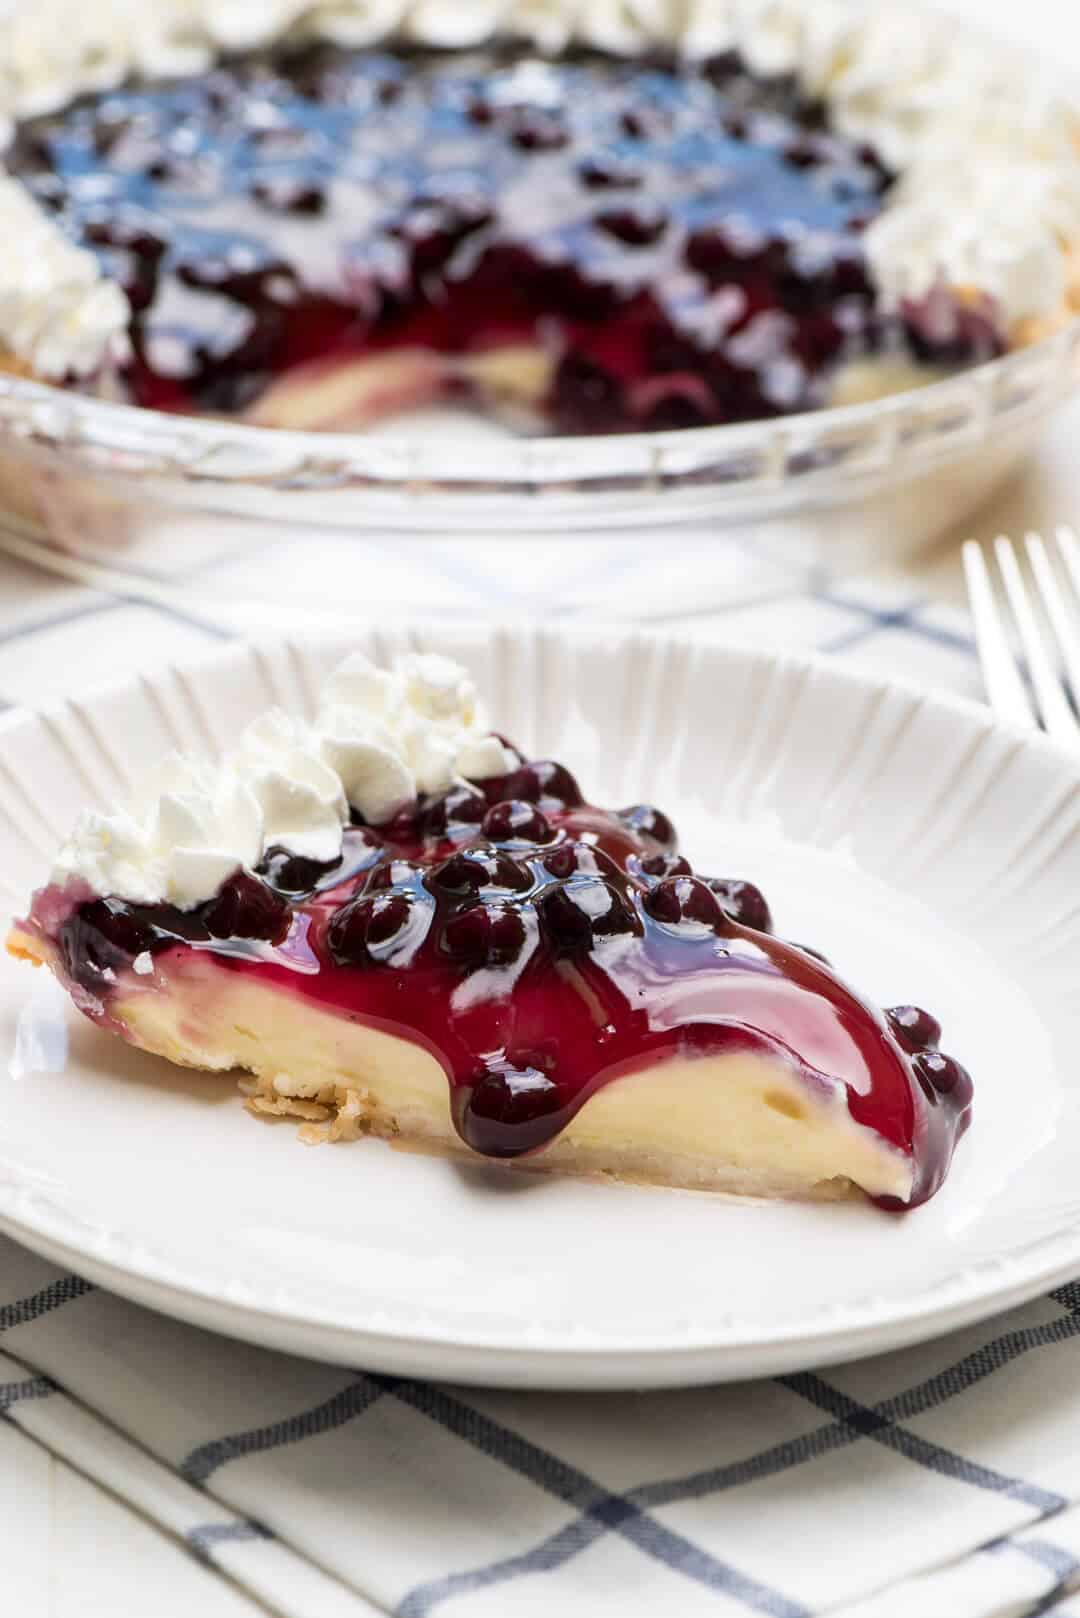 A slice of pie with blueberries and whipped cream on a white plate.